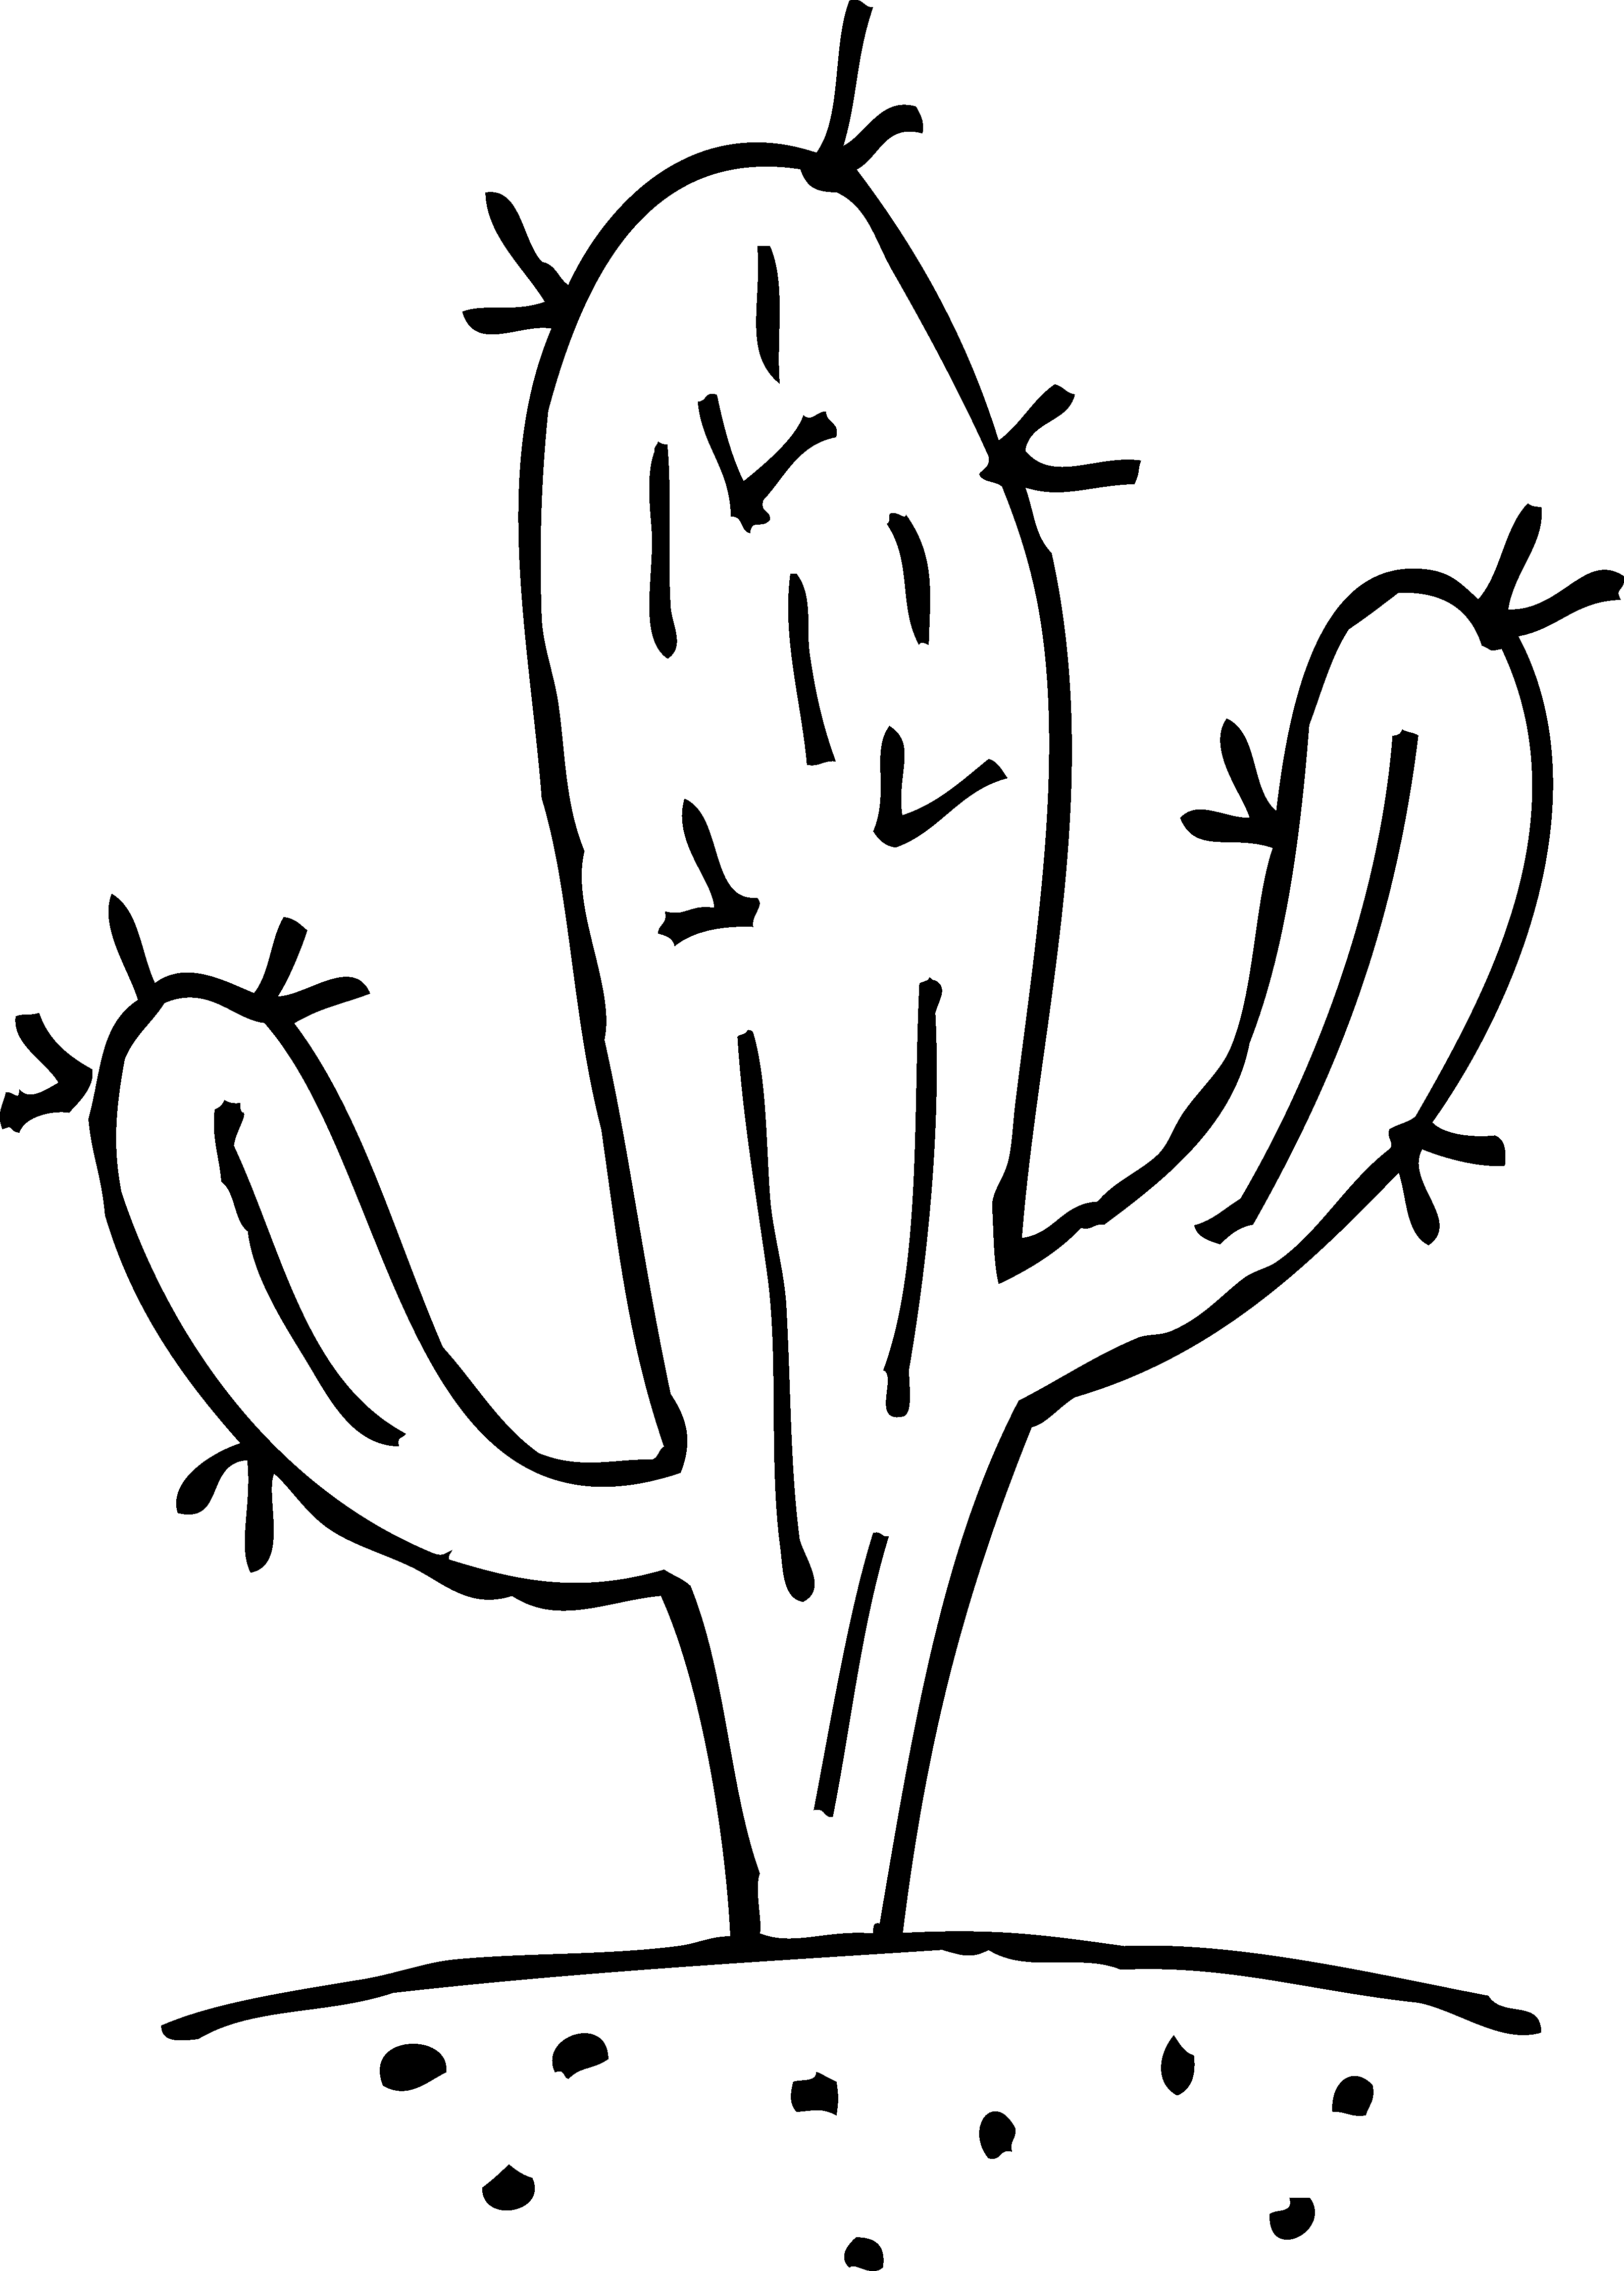 Cactus Clipart to Download - dbclipart.com